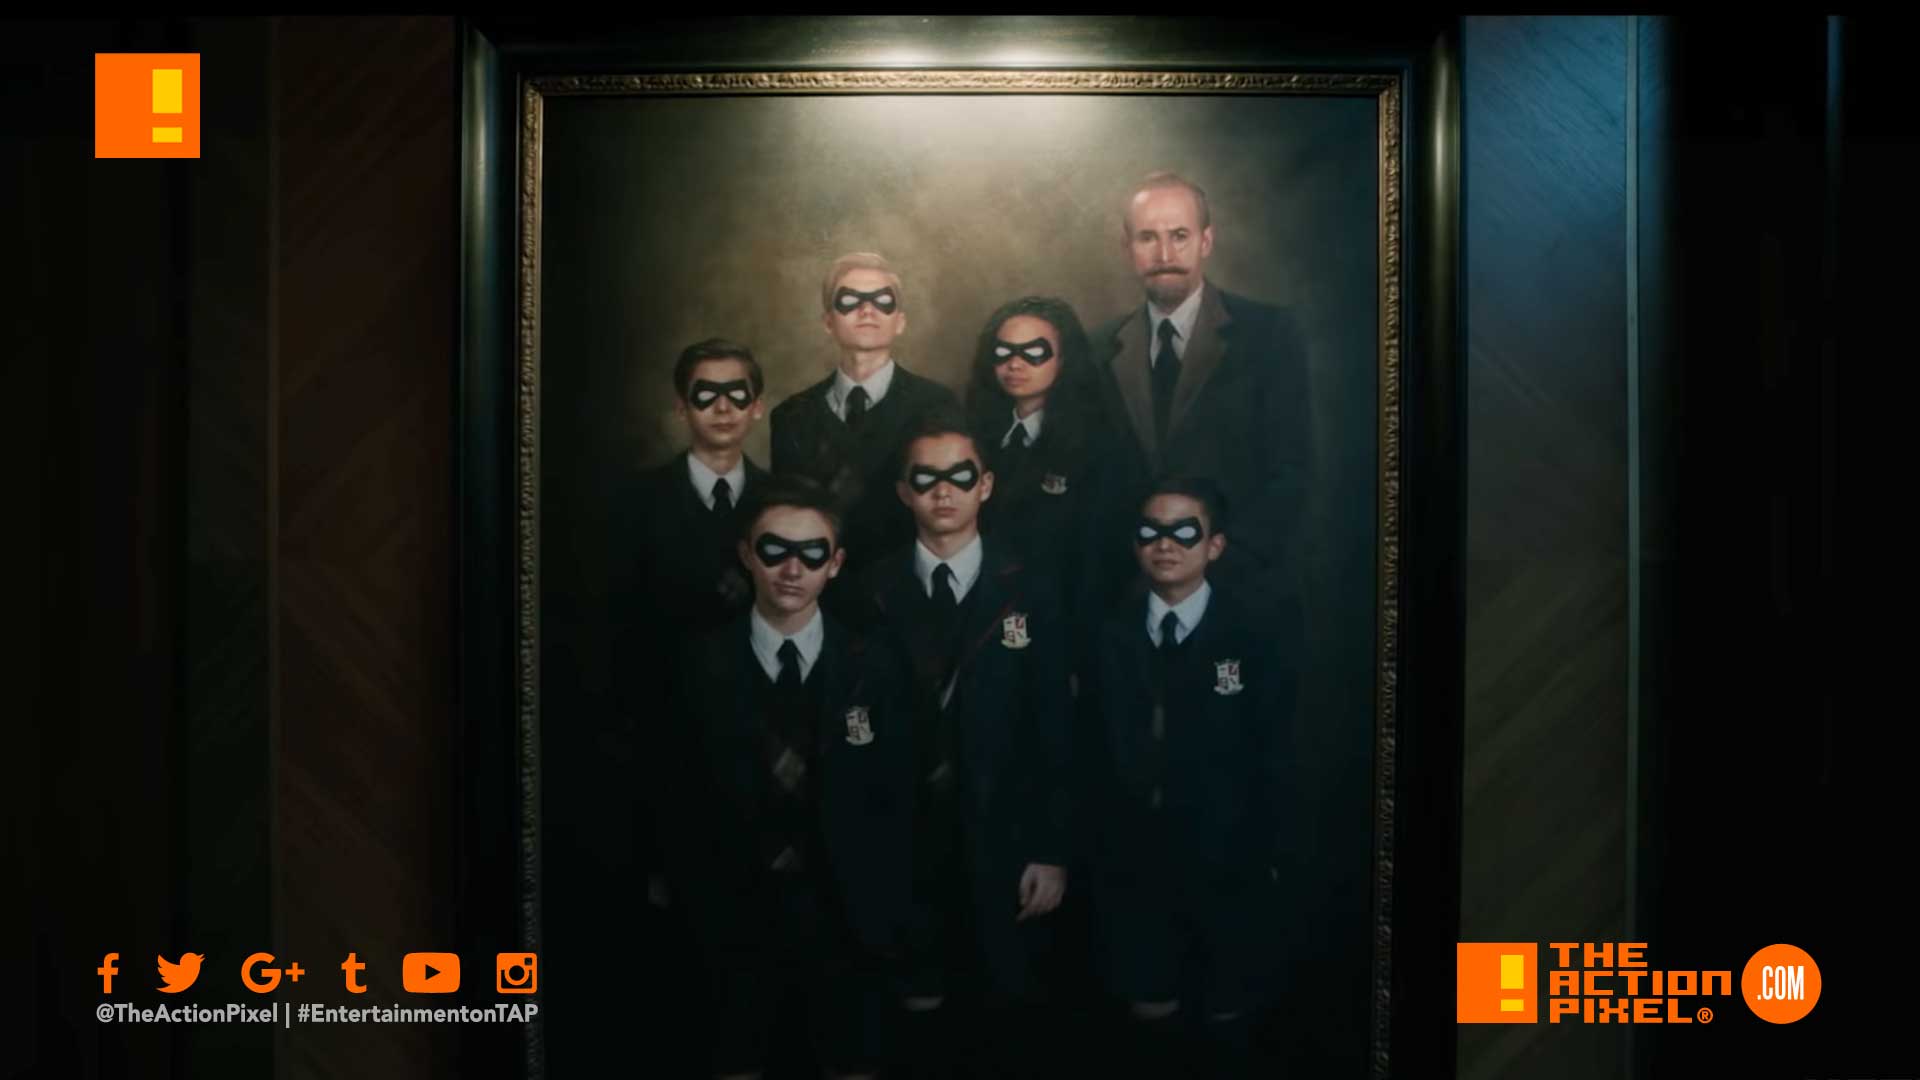 Netflix introduces us to “The Umbrella Academy” in new featurette